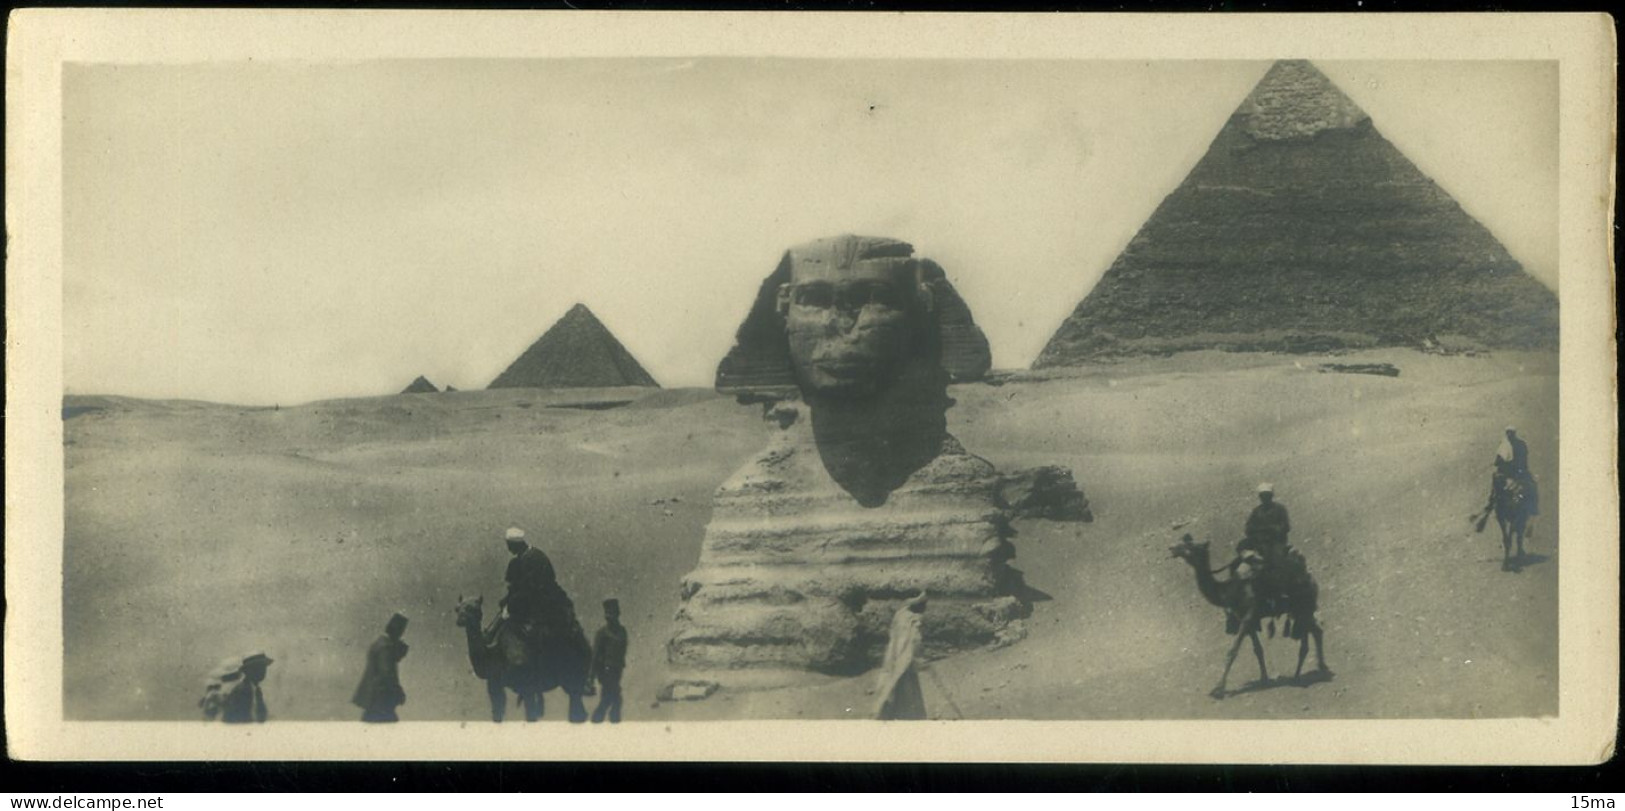 EGYPT Pyramids And Sphinx Format Réduit Reduced Size - Guiza